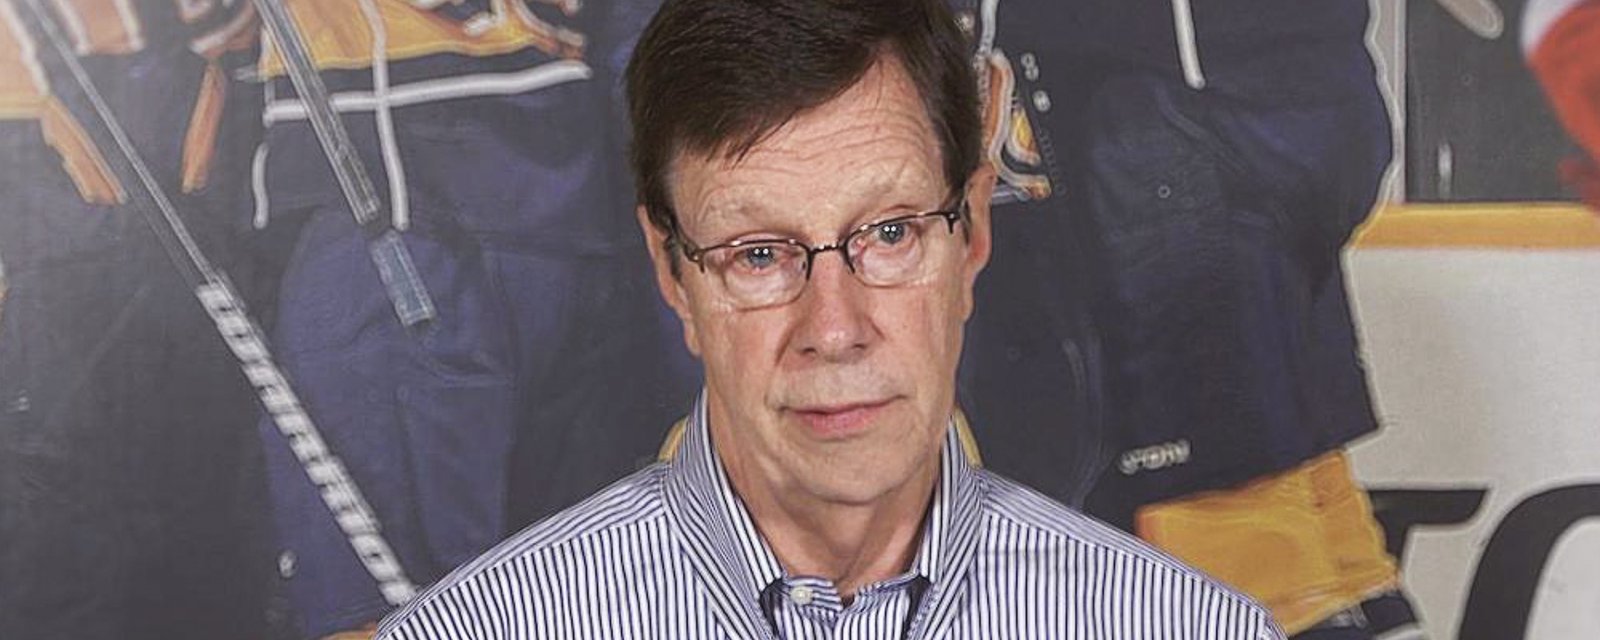 Breaking: Predators GM had controversial comments following elimination.